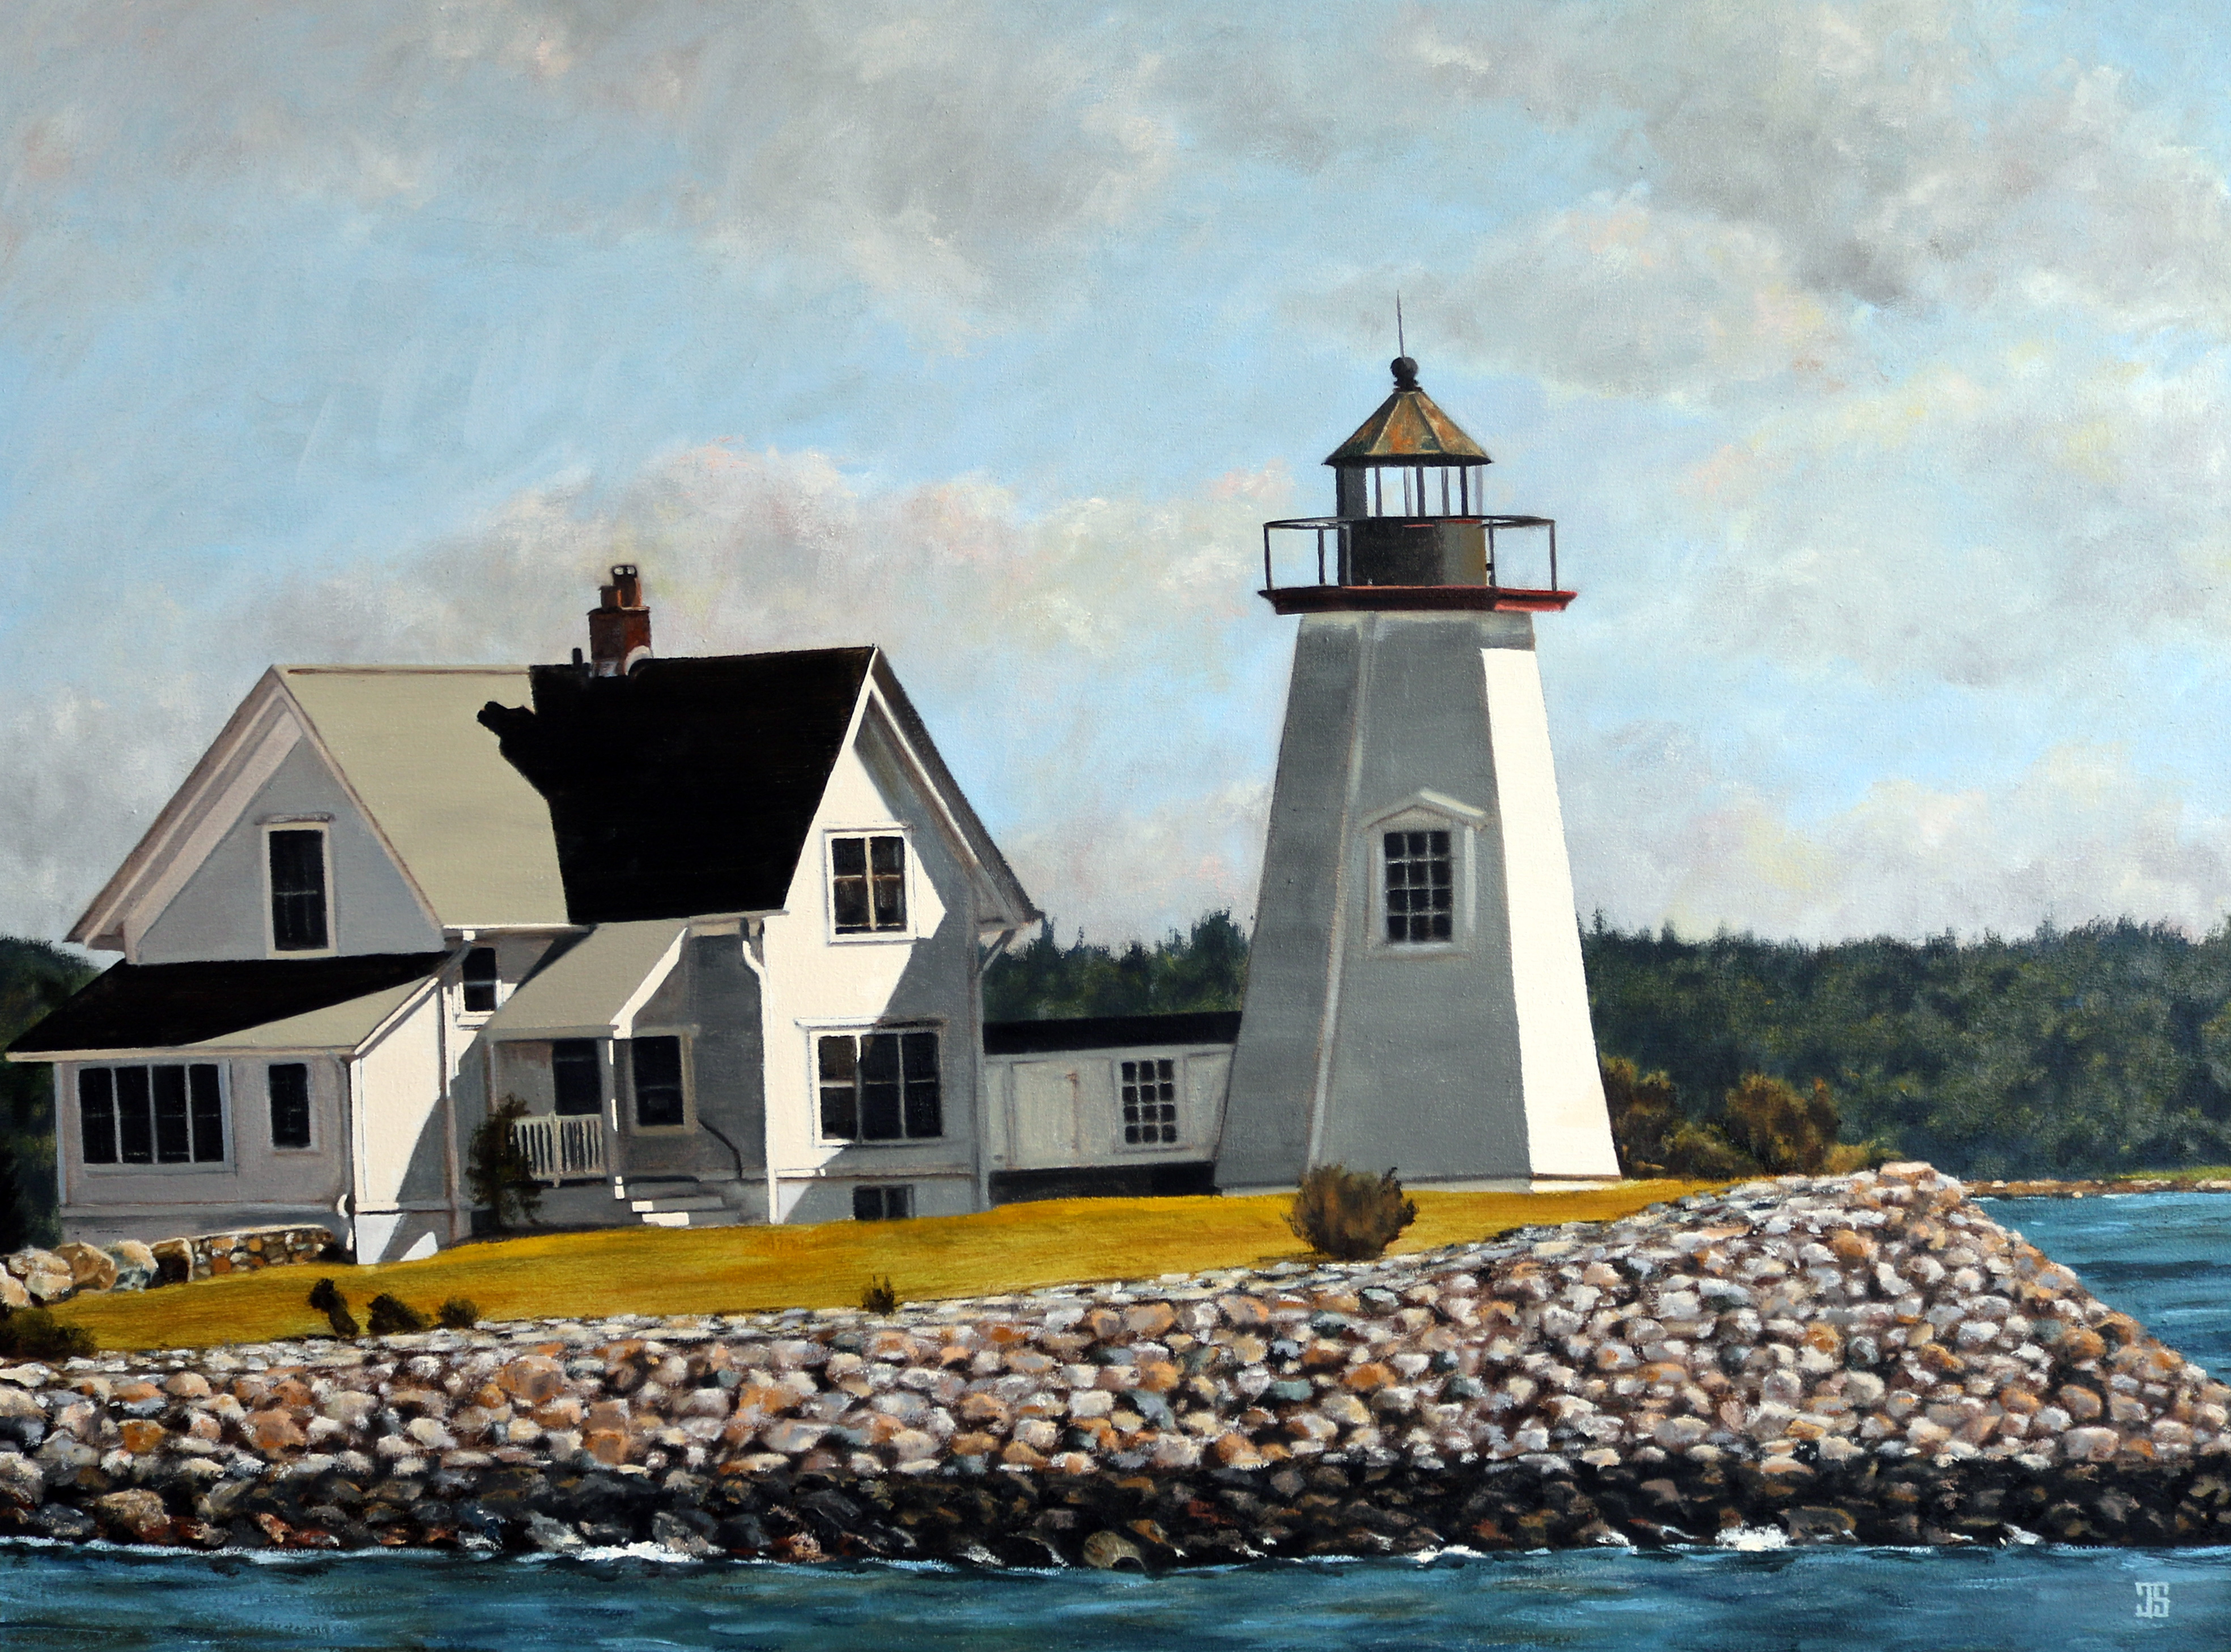 Oil painting "Wings Neck Lighthouse" by Jeffrey Dale Starr